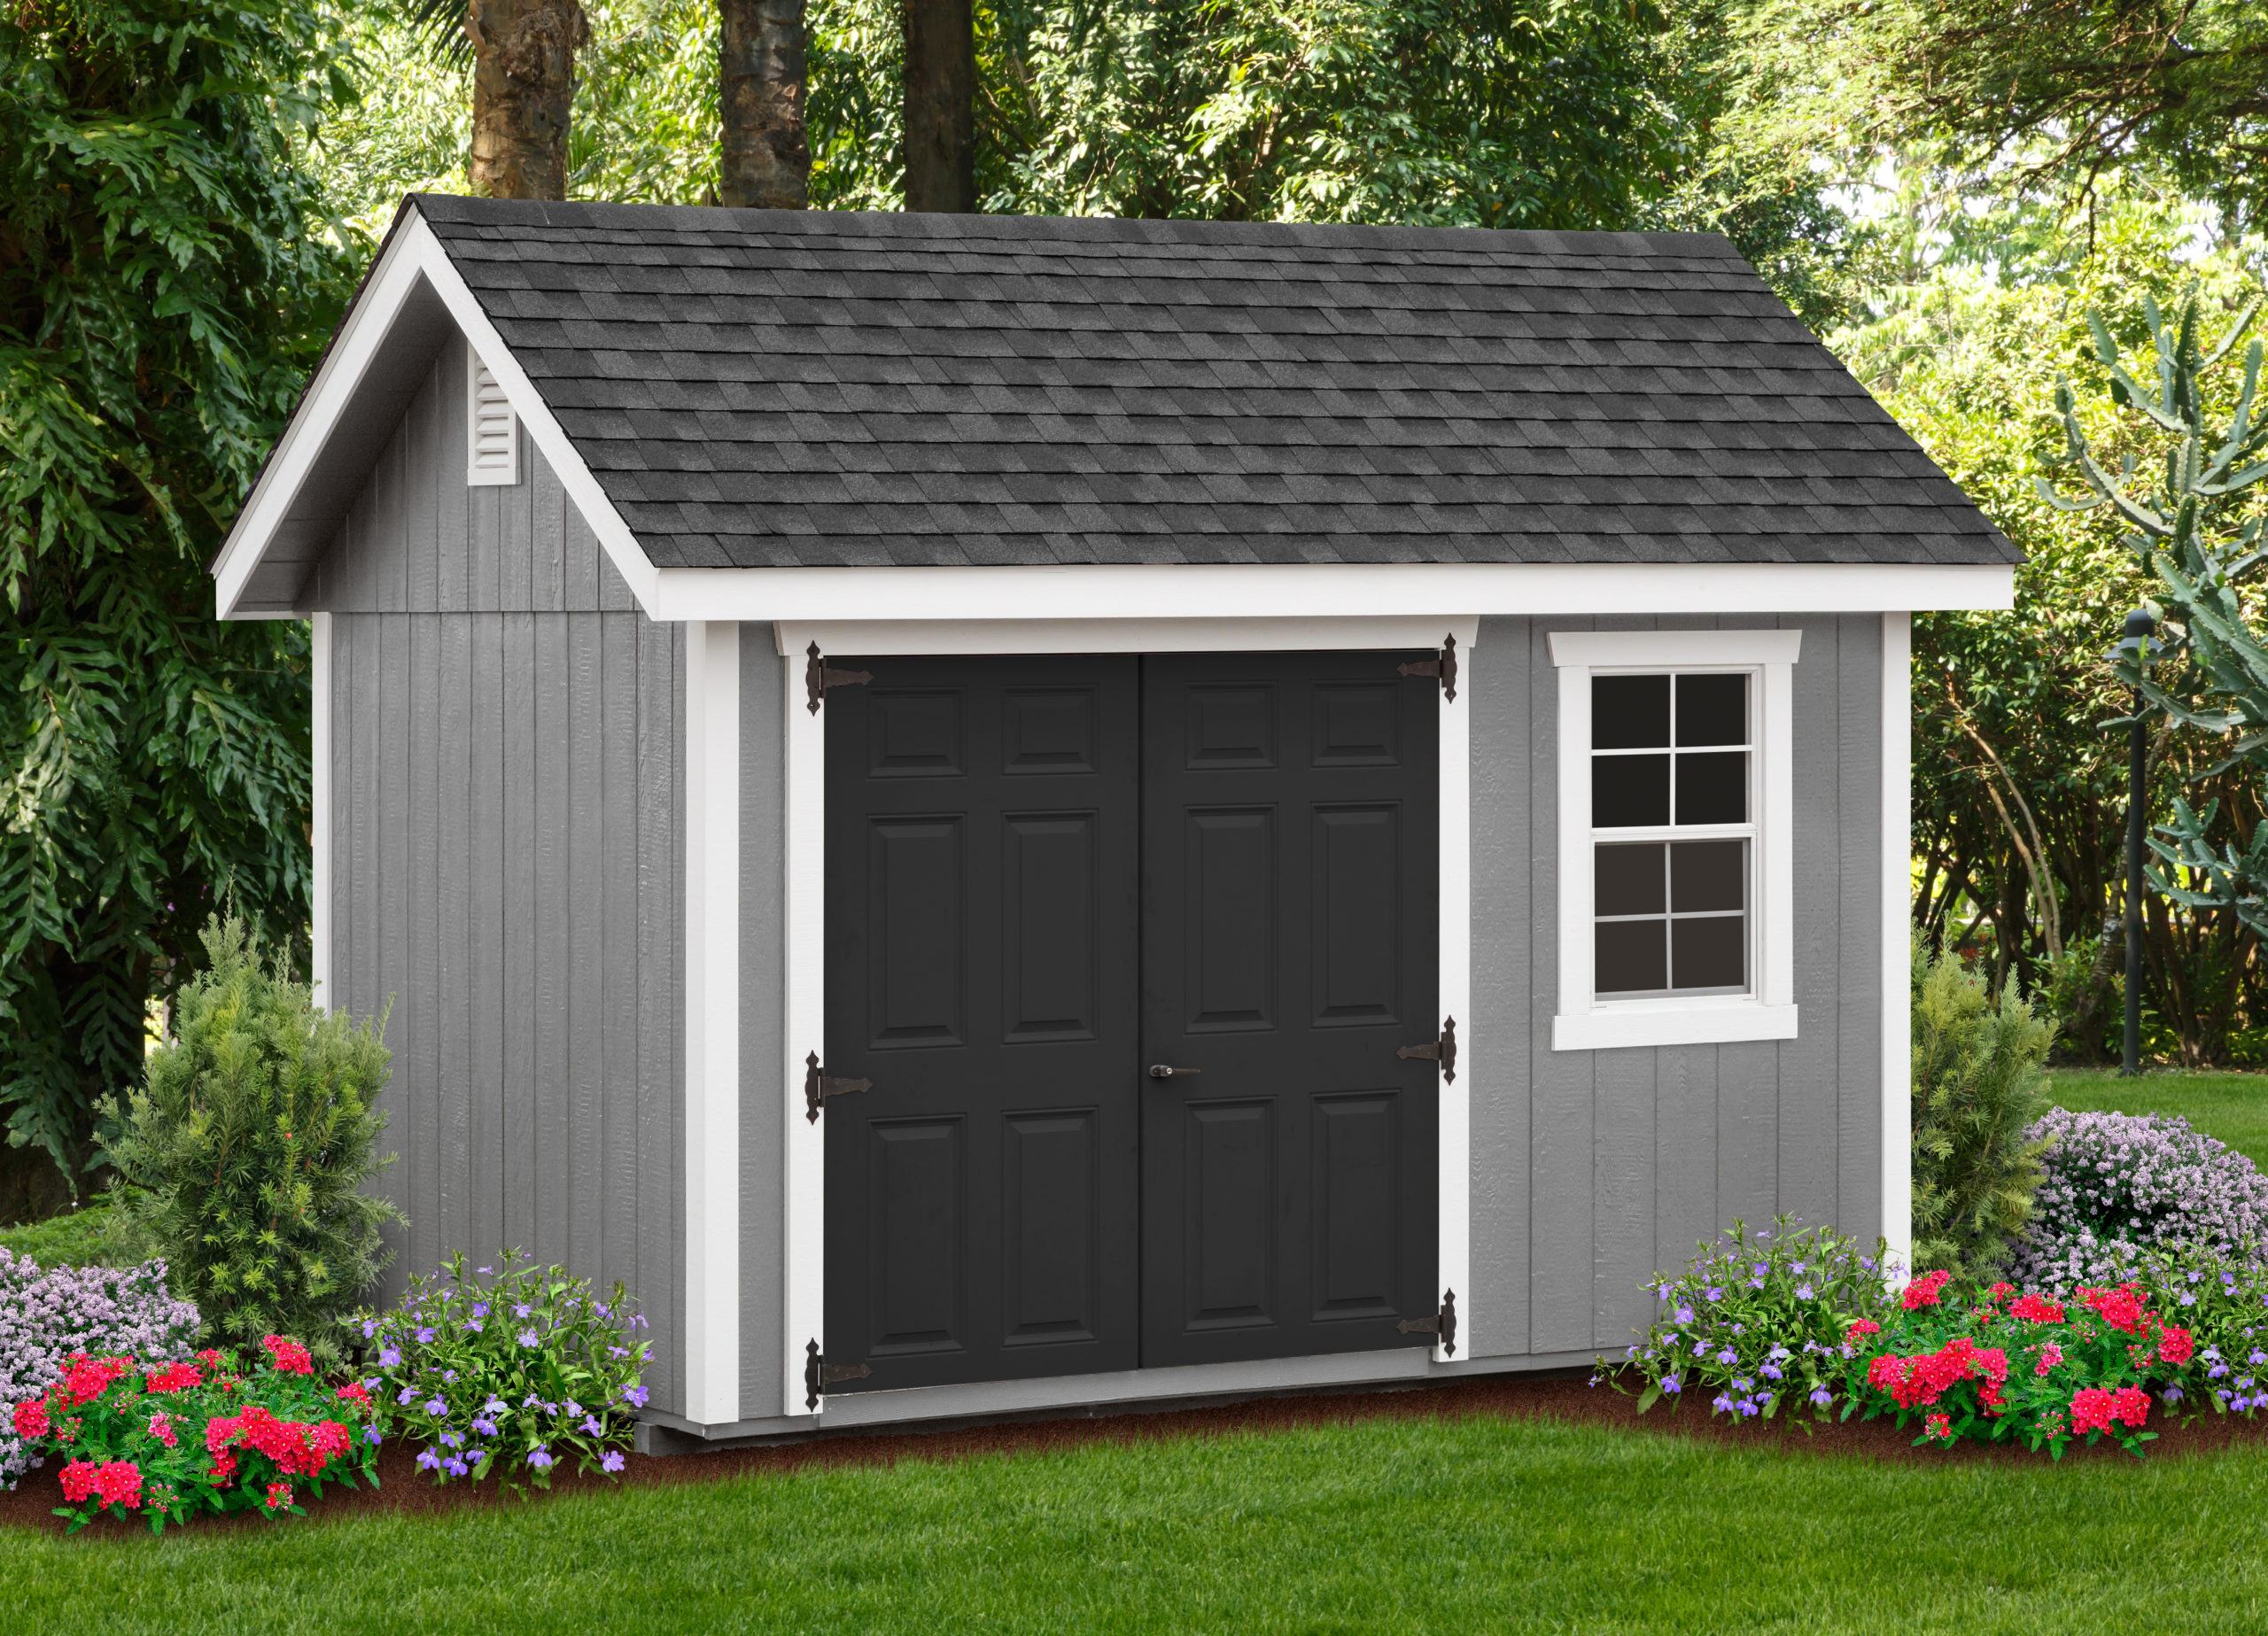 town of brookhaven shed permits